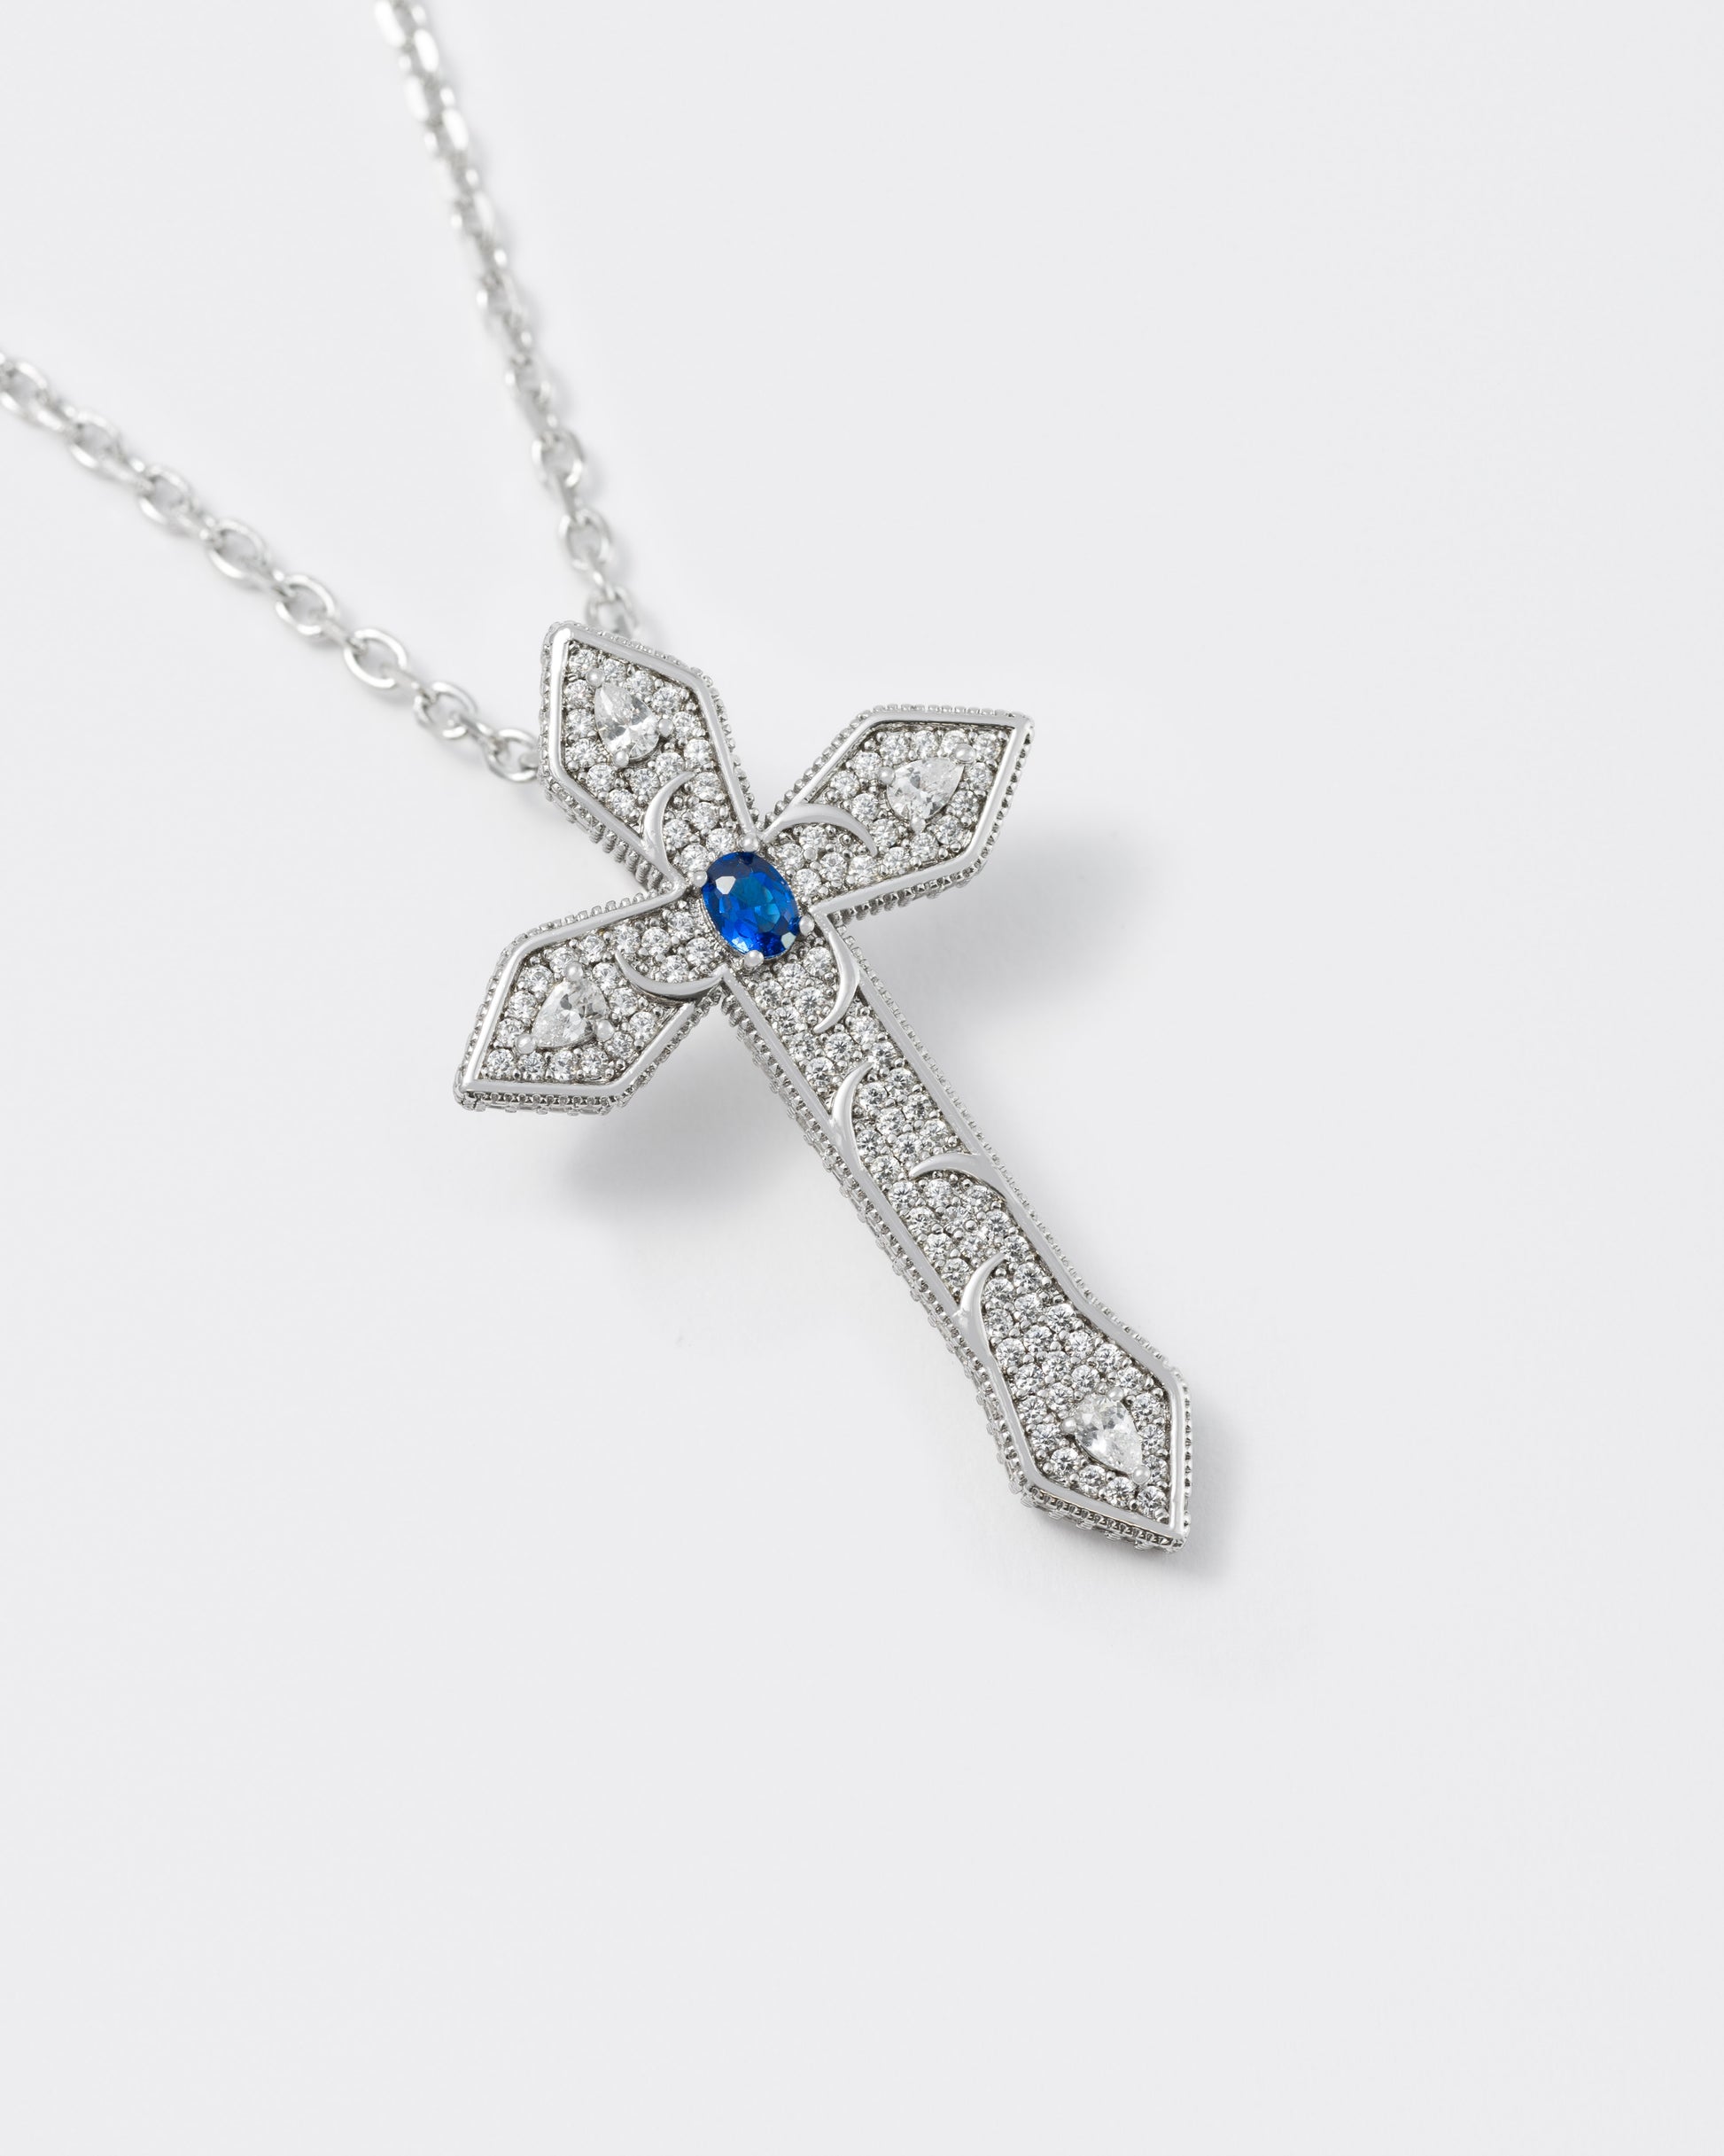 detail of gothic cross pendant necklace with 18kt white gold coating, drop and oval shaped stones in diamond white and sapphire blue with metal gothic detailing. Hand-set micropavé on front and sides